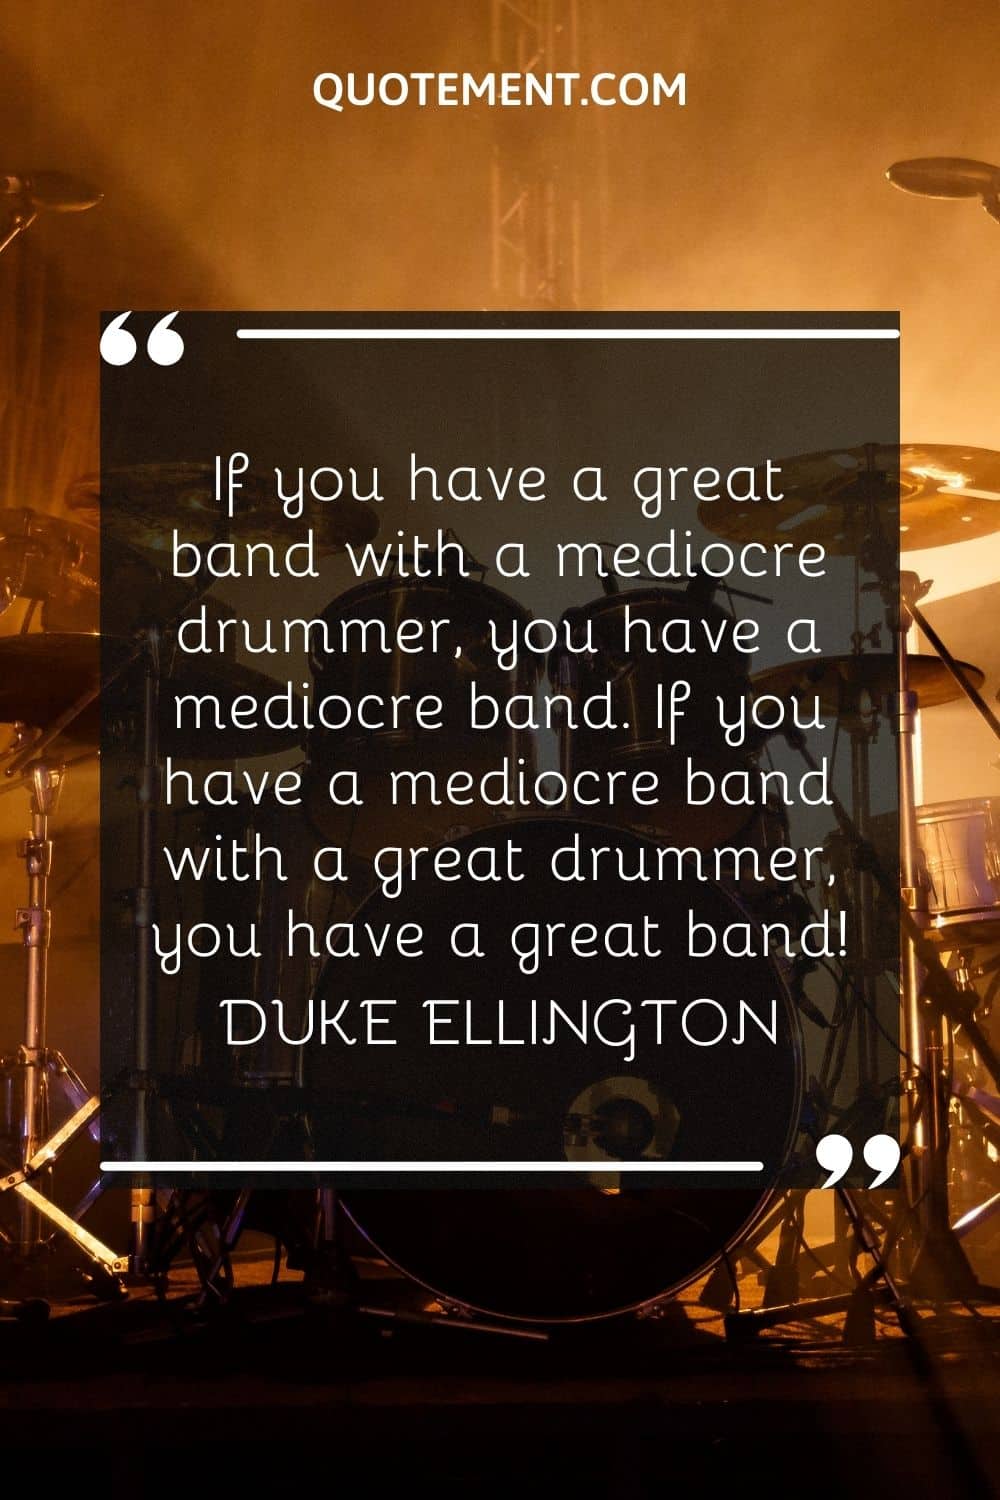 If you have a great band with a mediocre drummer, you have a mediocre band. If you have a mediocre band with a great drummer, you have a great band